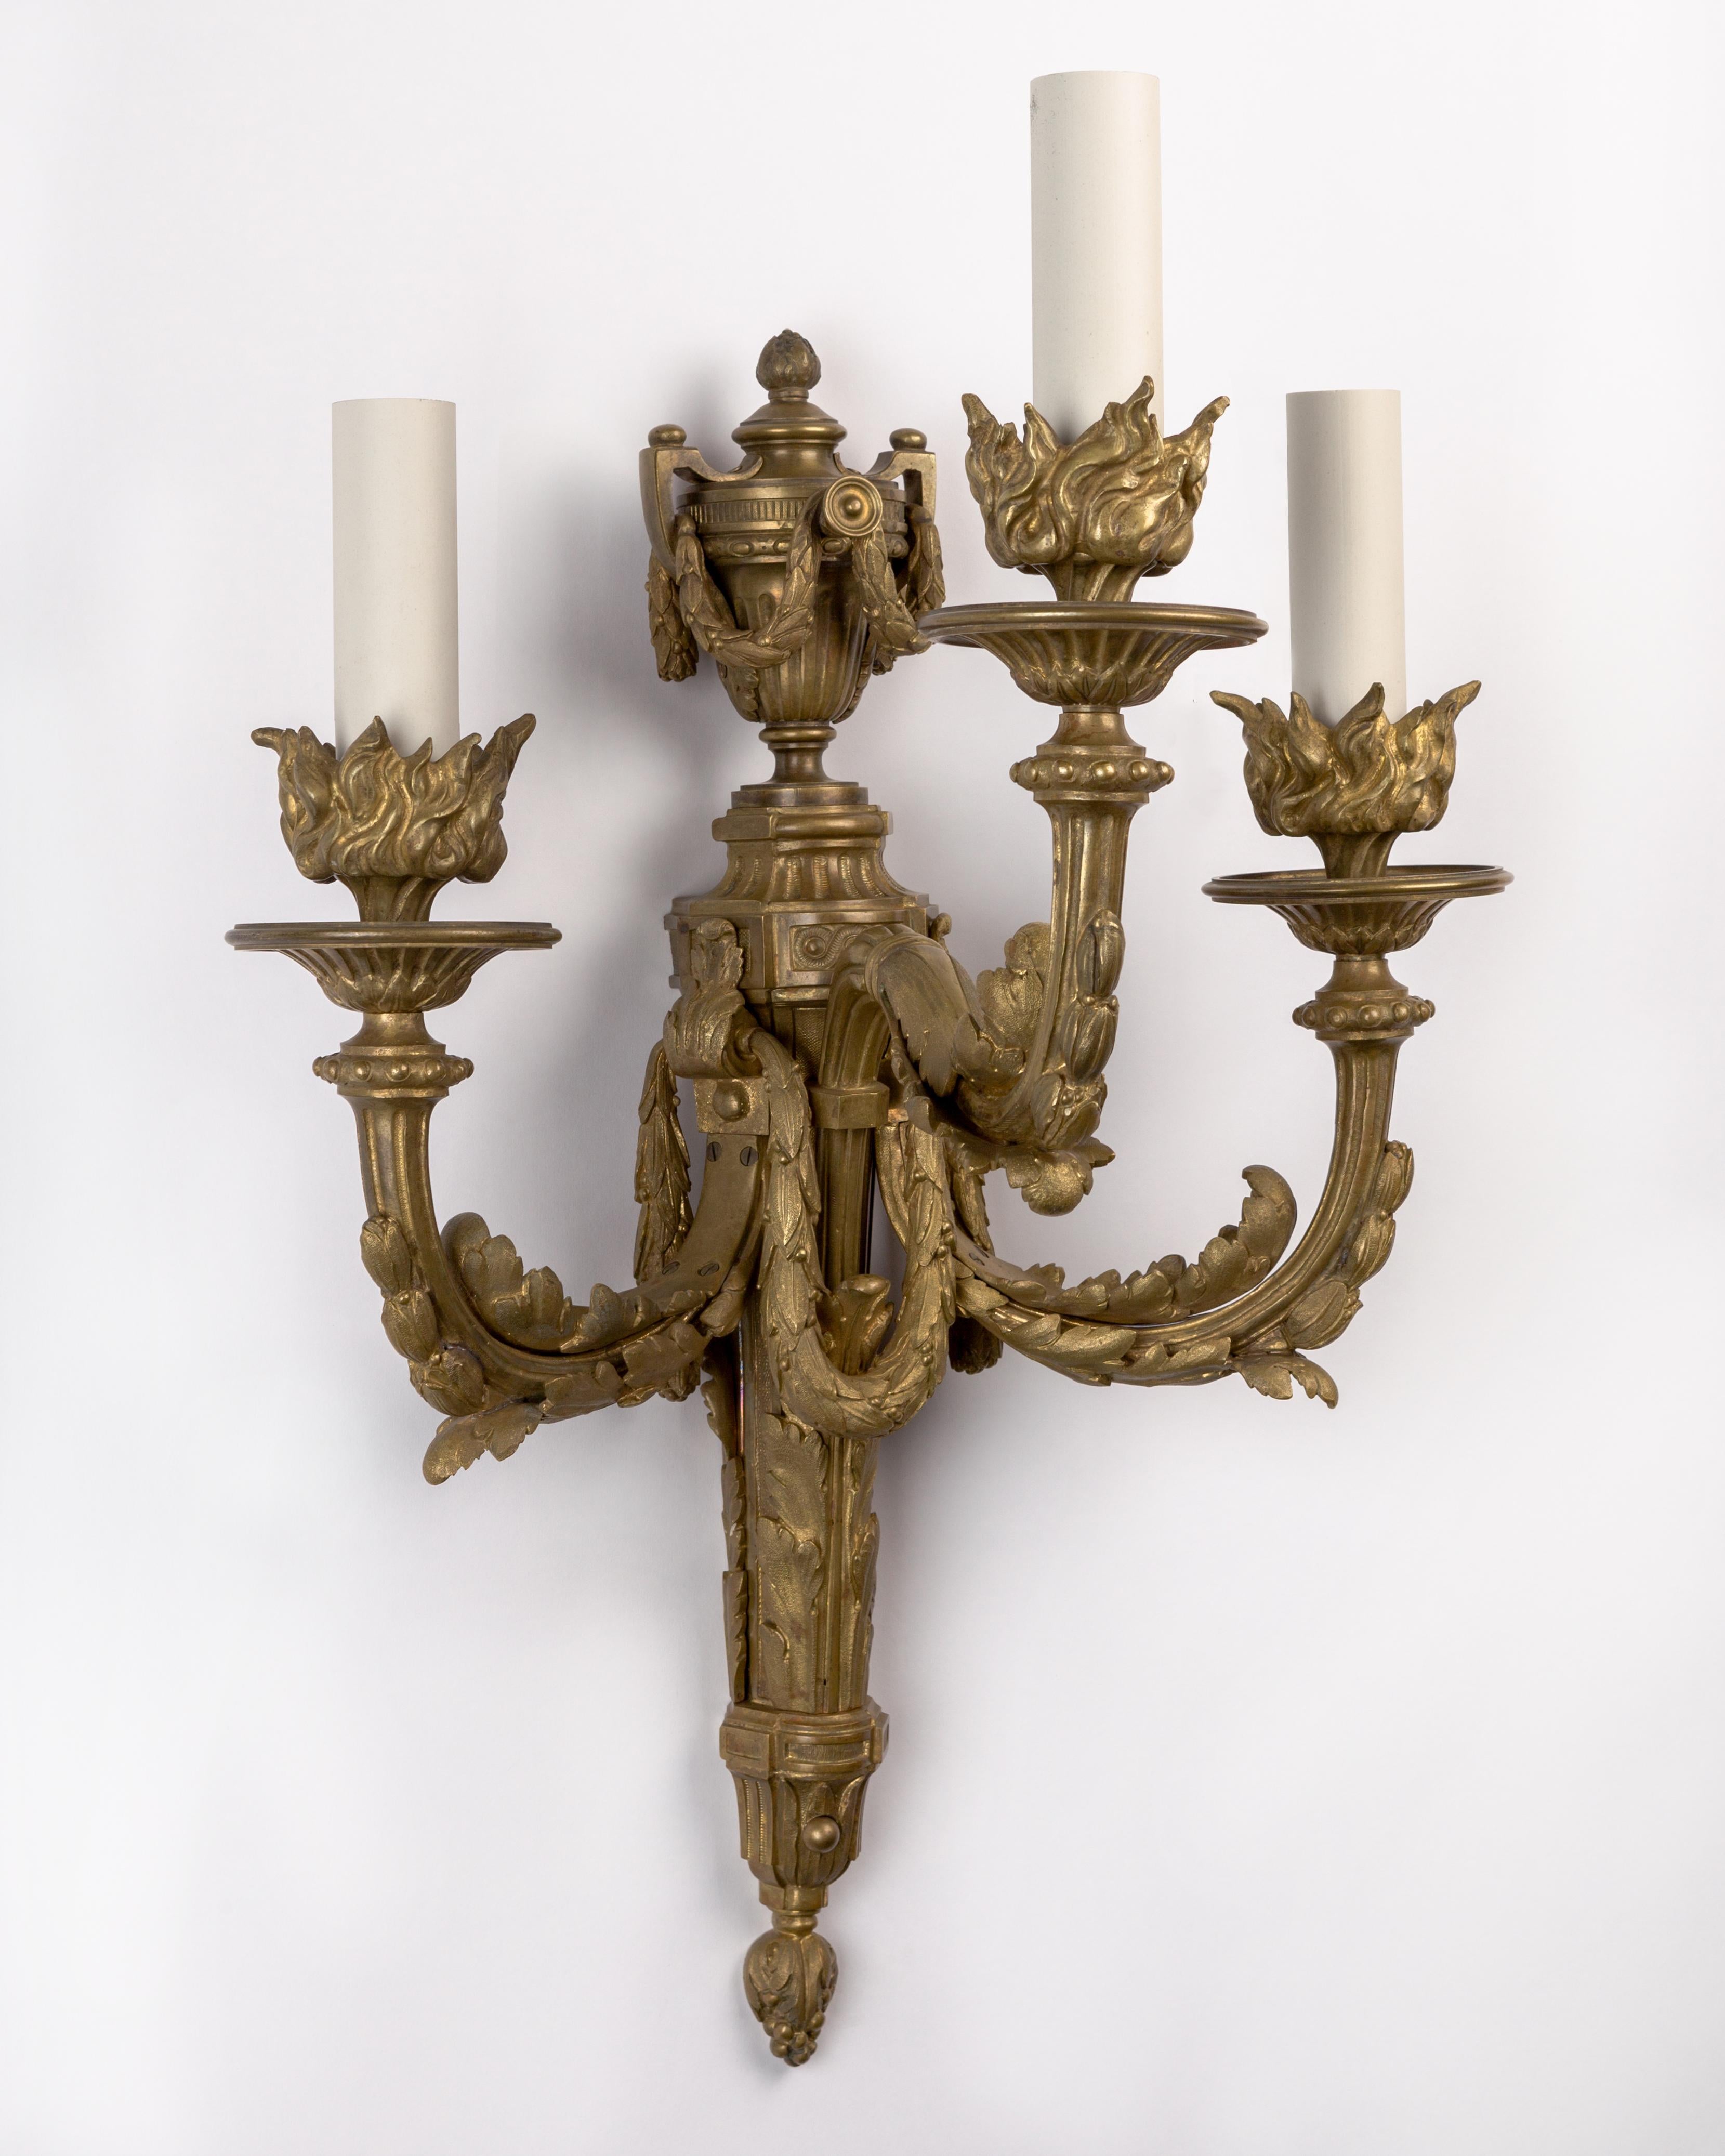 AIS1009

A pair of finely chased and strongly proportioned three-light sconces in bronze with faint traces of the original gilding, circa 1890.

Dimensions:
Overall: 25